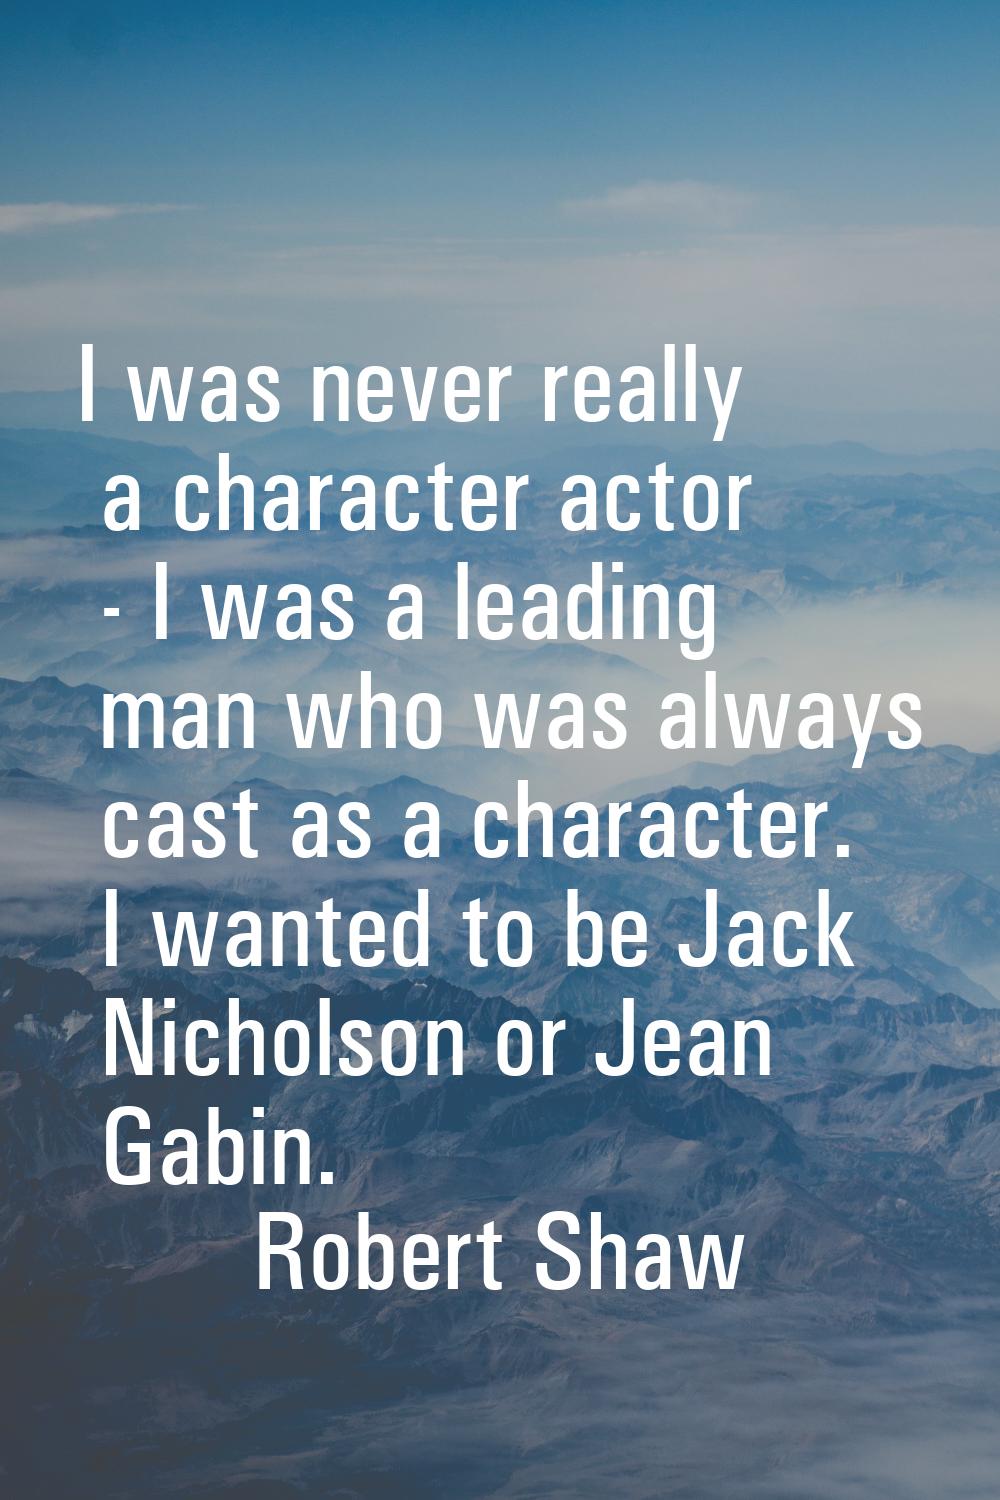 I was never really a character actor - I was a leading man who was always cast as a character. I wa